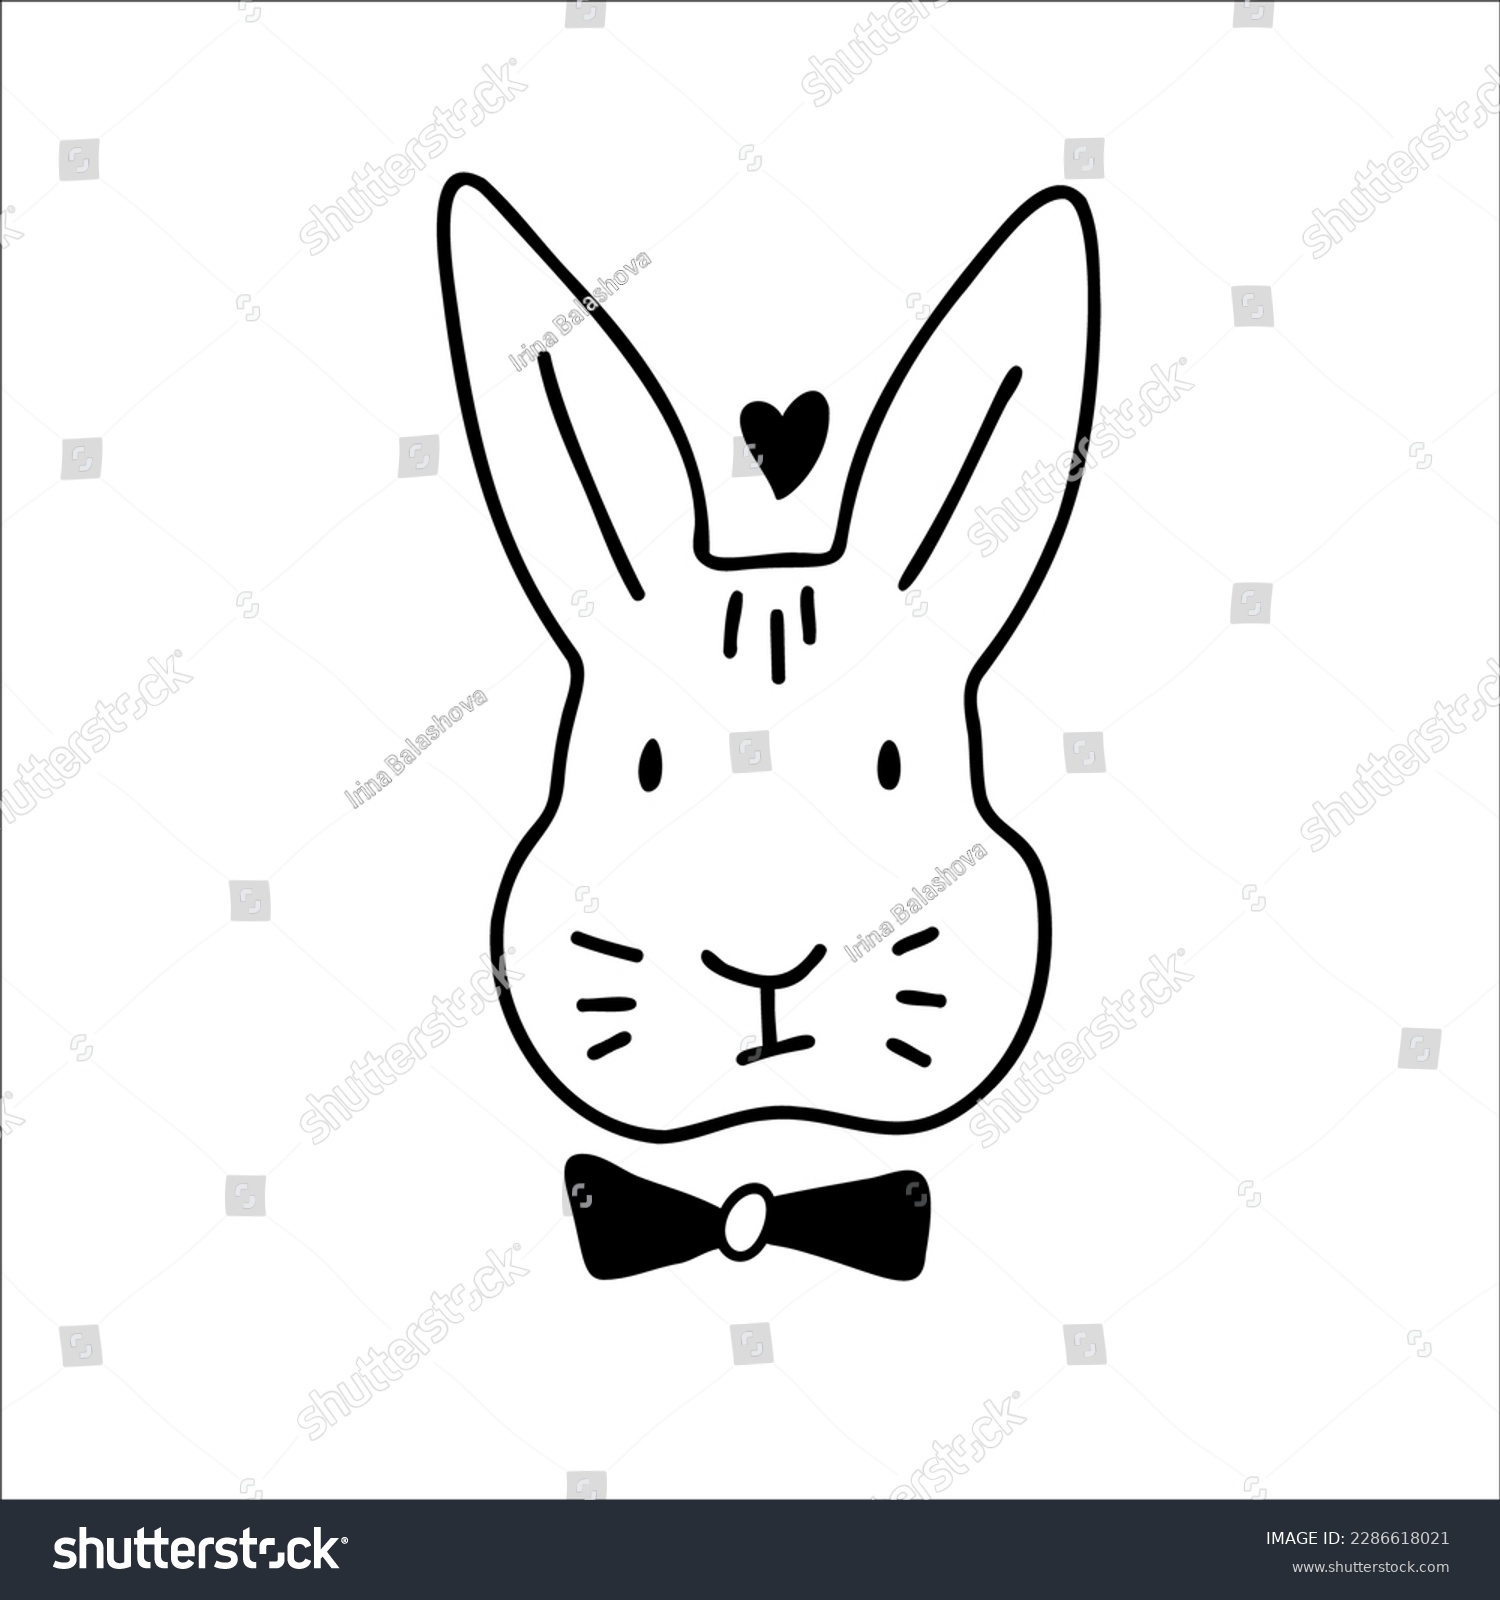 SVG of Cute Rabbit bunny SVG Cut File Design for Cricut and Silhouette. svg